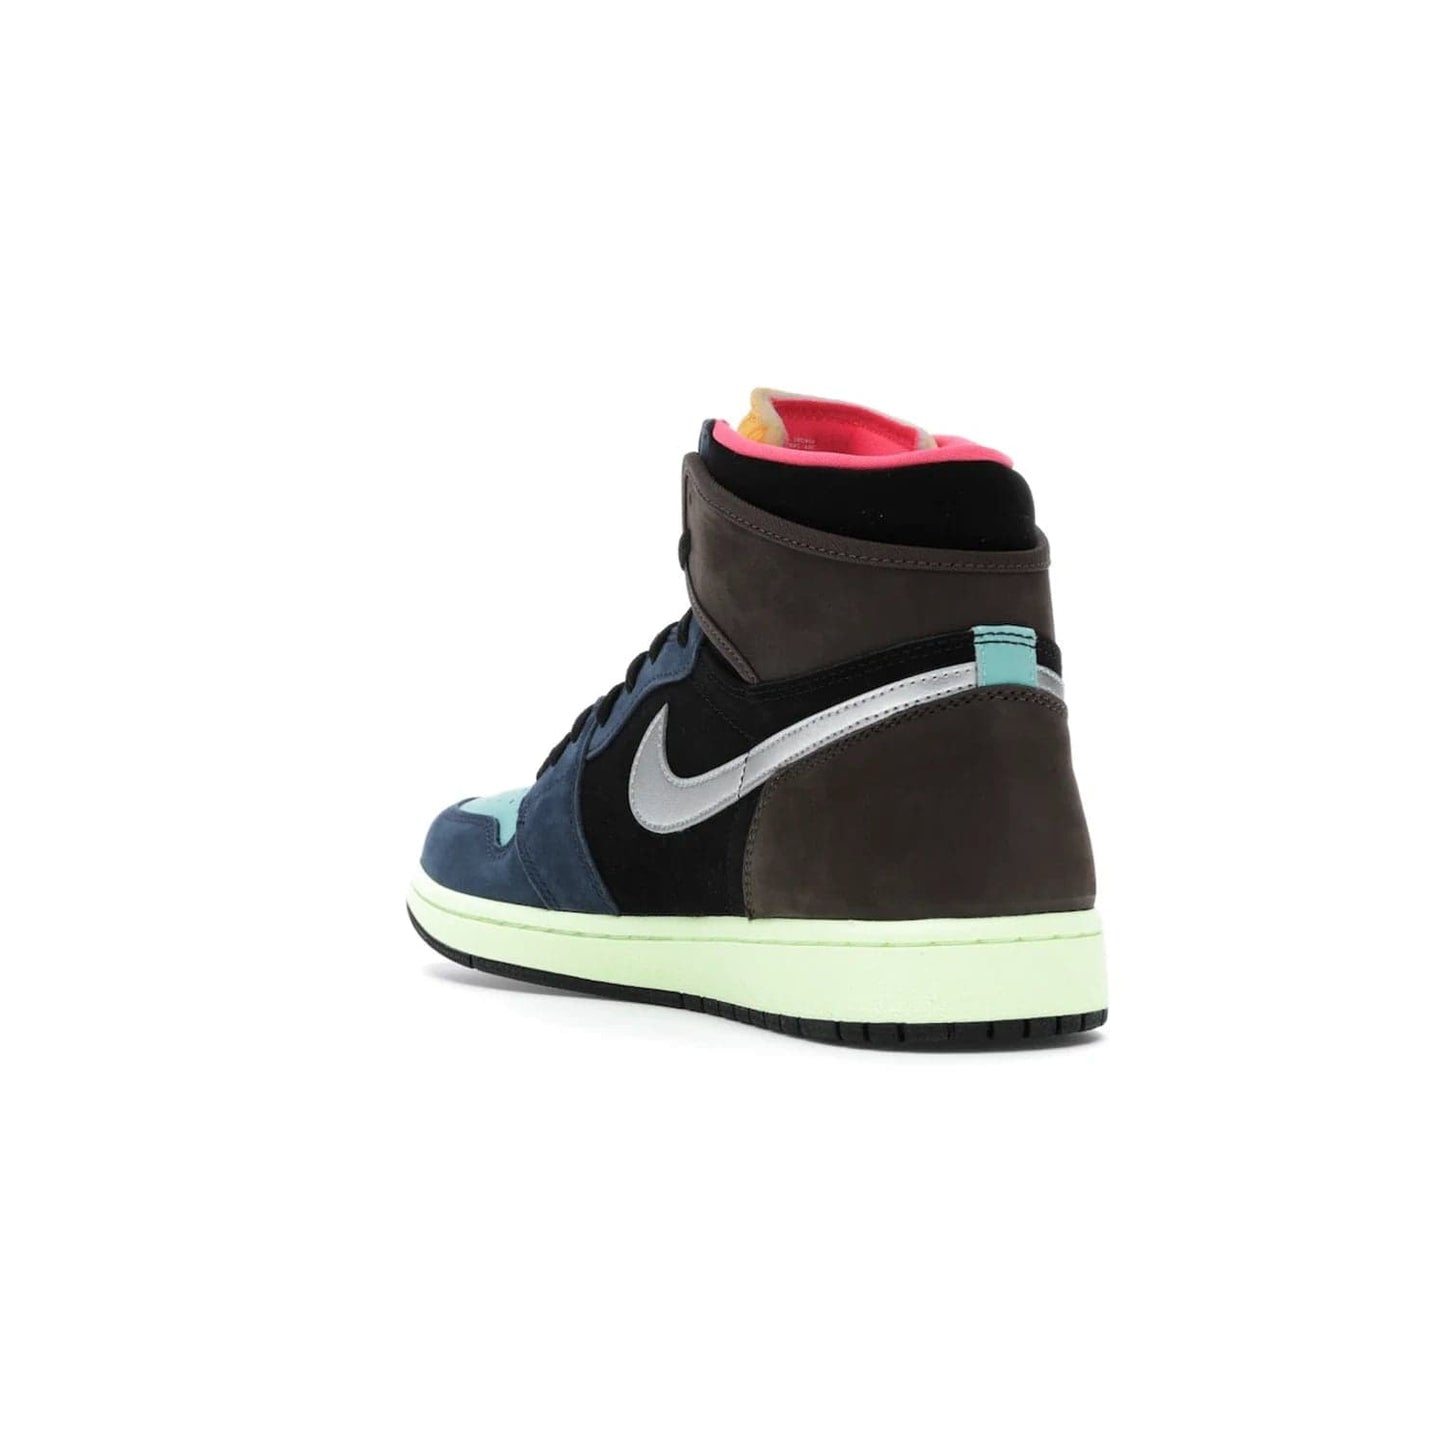 Jordan 1 Retro High Tokyo Bio Hack - Image 25 - Only at www.BallersClubKickz.com - Step up your sneaker game with the Air Jordan 1 Retro High Tokyo Bio Hack! Unique design featuring multiple materials and eye-catching colors. Metallic leather Swoosh and light green midsole for a stunning look. Available now for just $170.